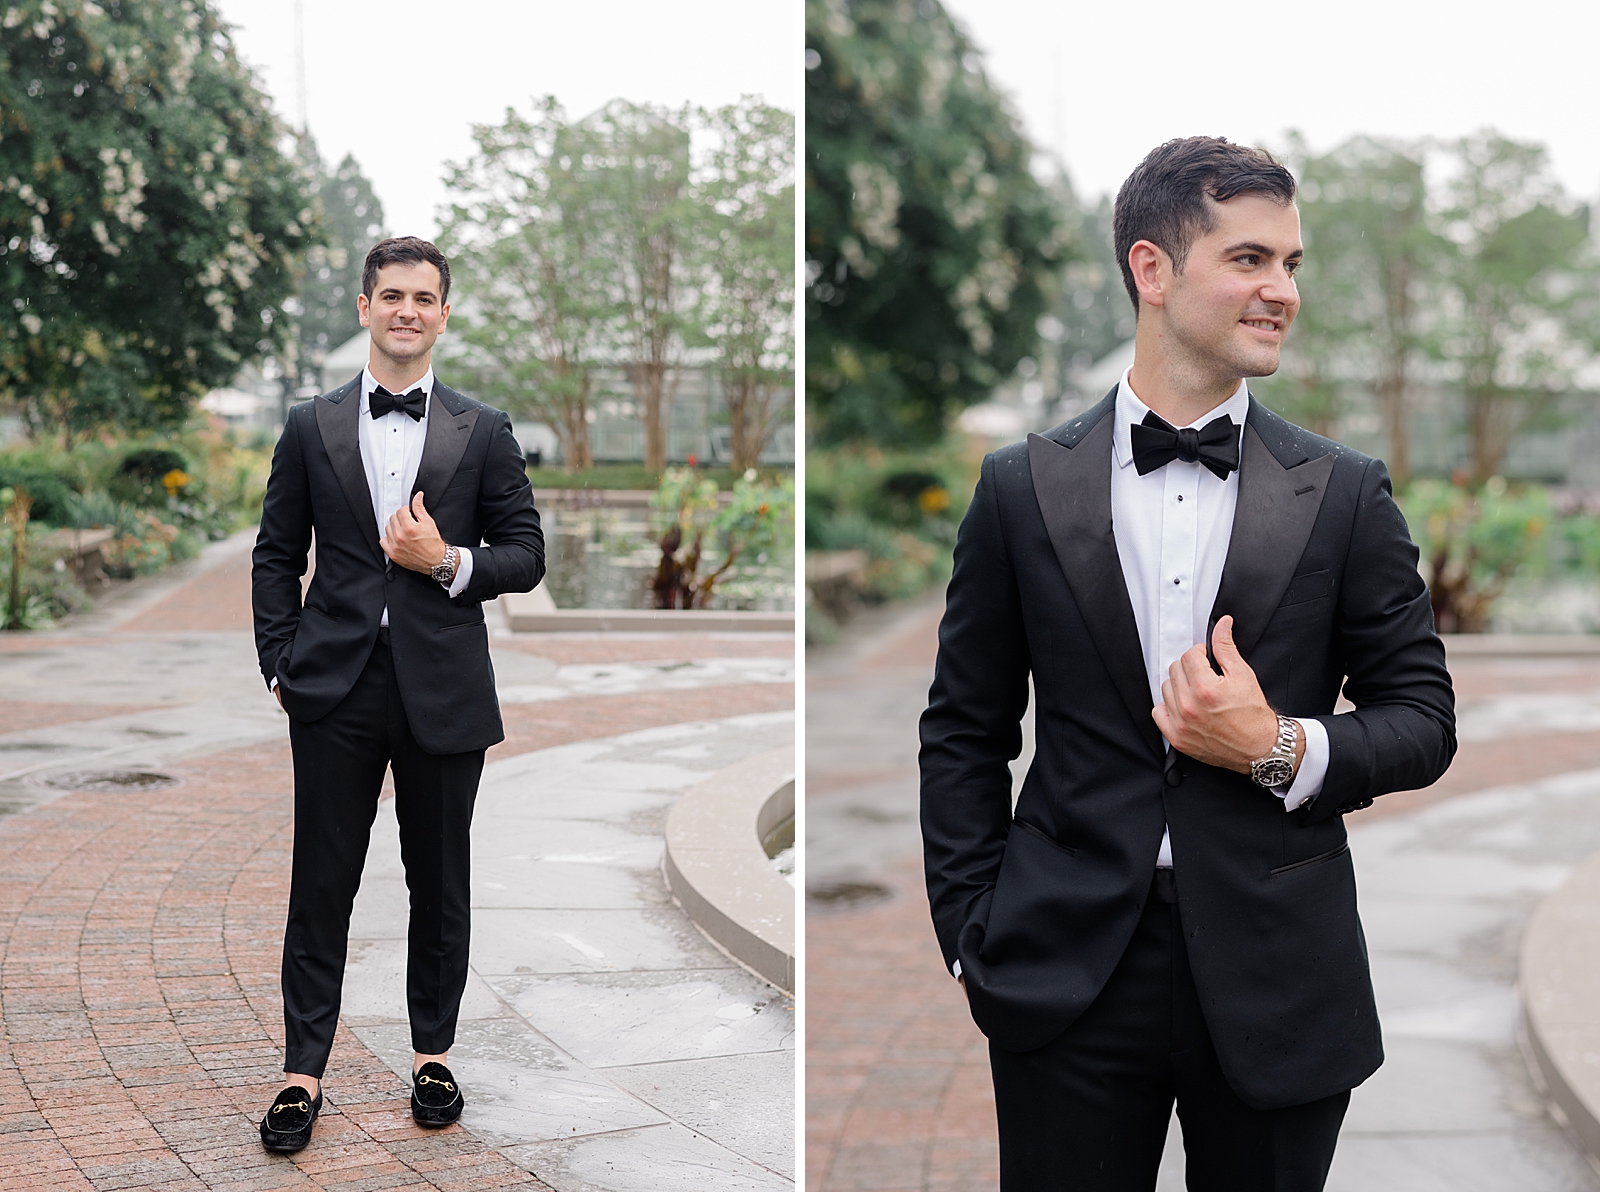 Left photo: Full body shot of the groom smiling for the camera. 
Right photo: Upper body shot of the groom smiling off into the distance.